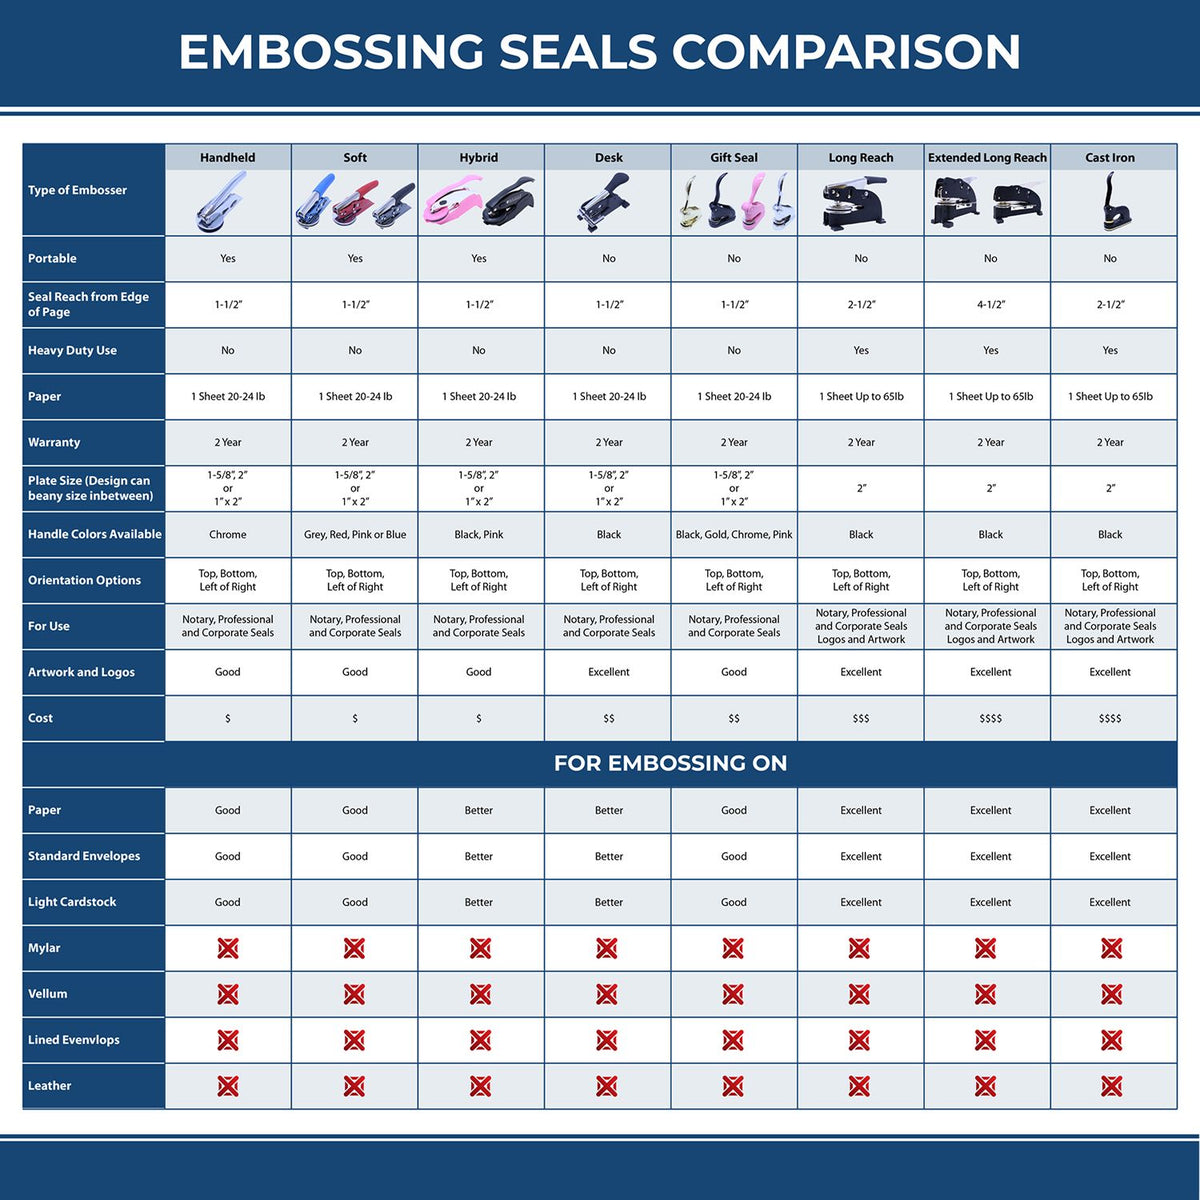 A comparison chart for the different types of mount models available for the Heavy Duty Cast Iron Kansas Architect Embosser.